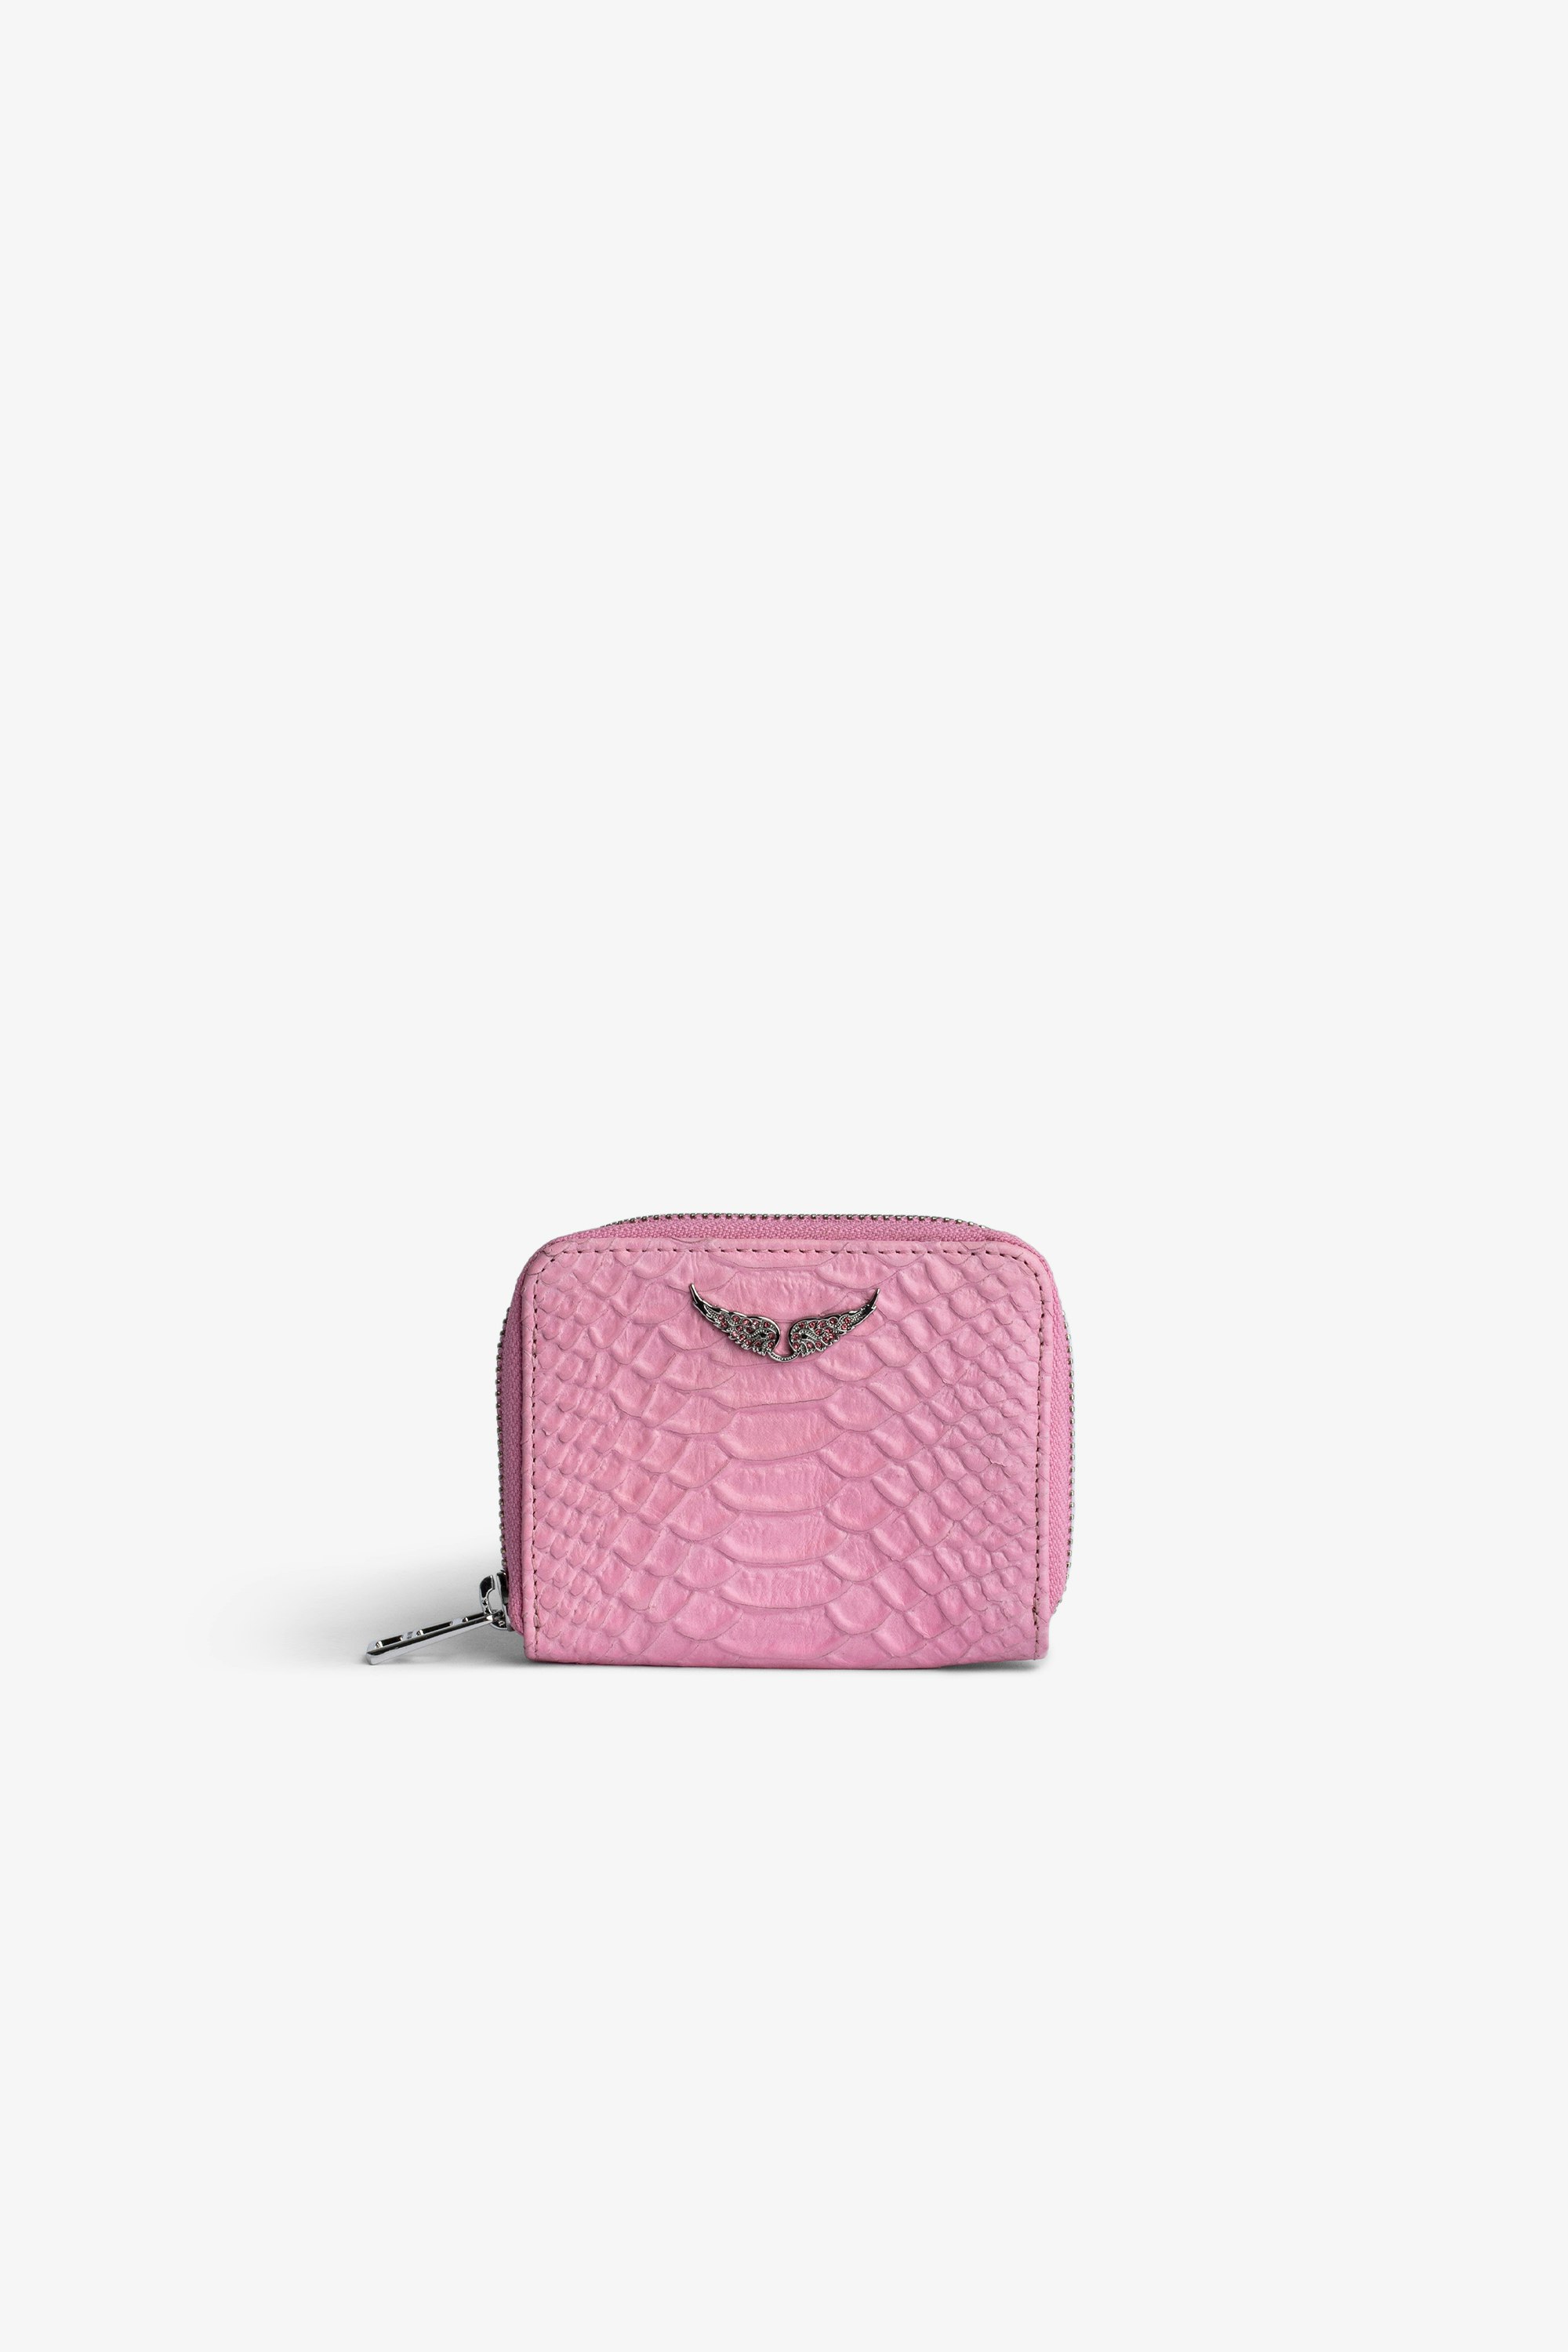 Mini ZV Savage Coin 財布 Women’s coin purse in pink python-effect leather